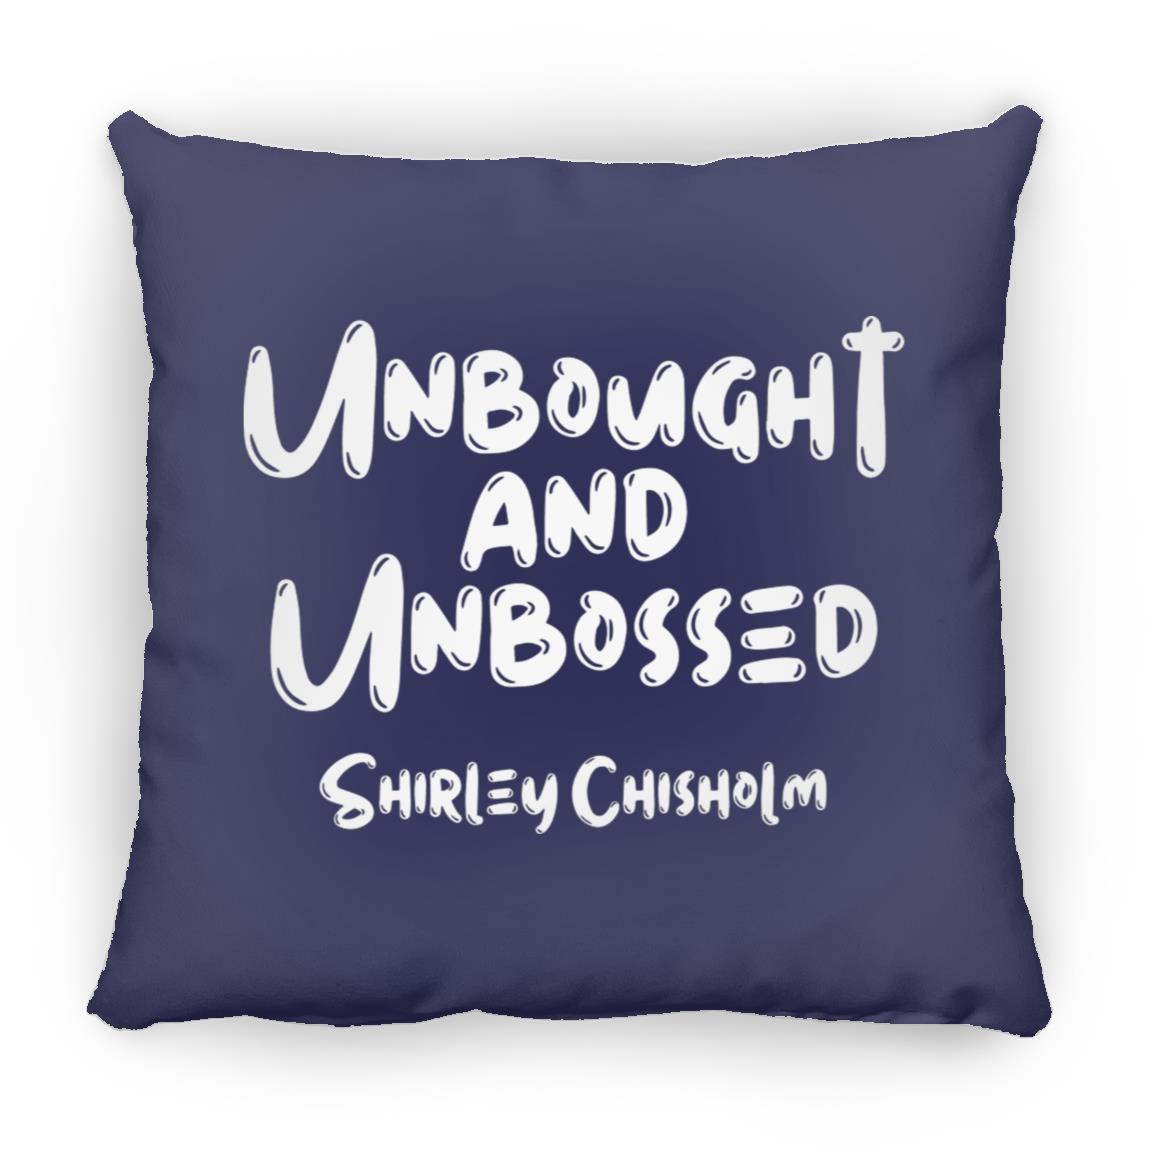 Shirley Chisholm Unbought And Unbossed Throw Pillow